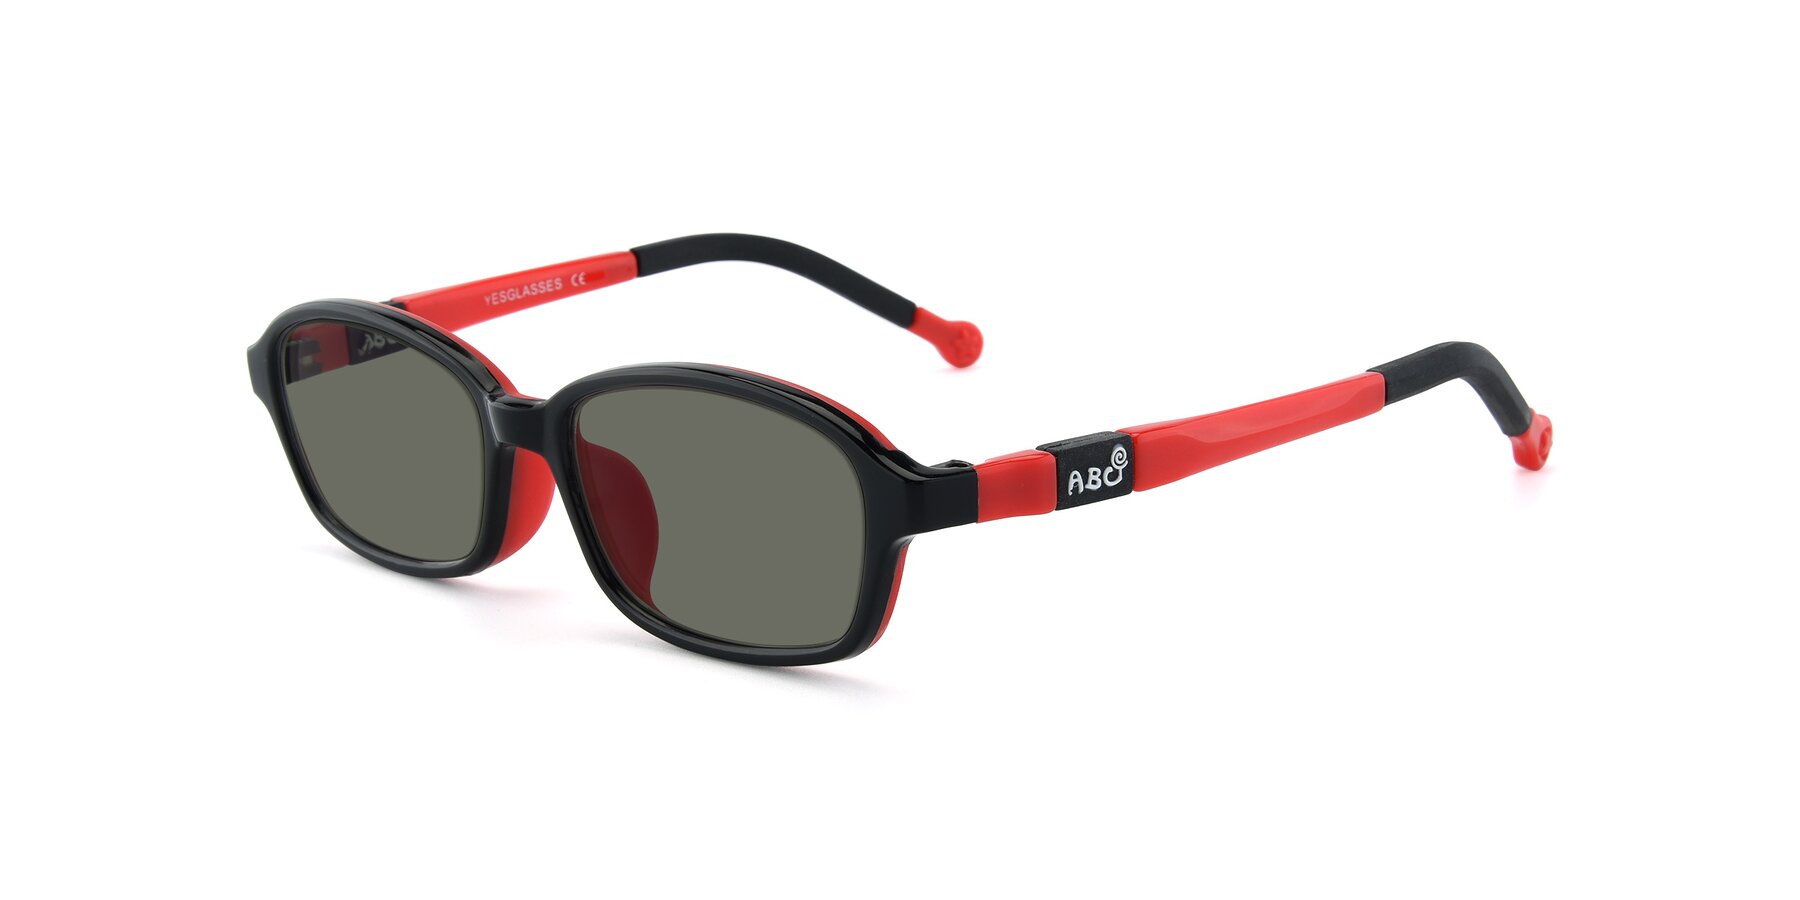 Angle of 533 in Black-Red with Gray Polarized Lenses